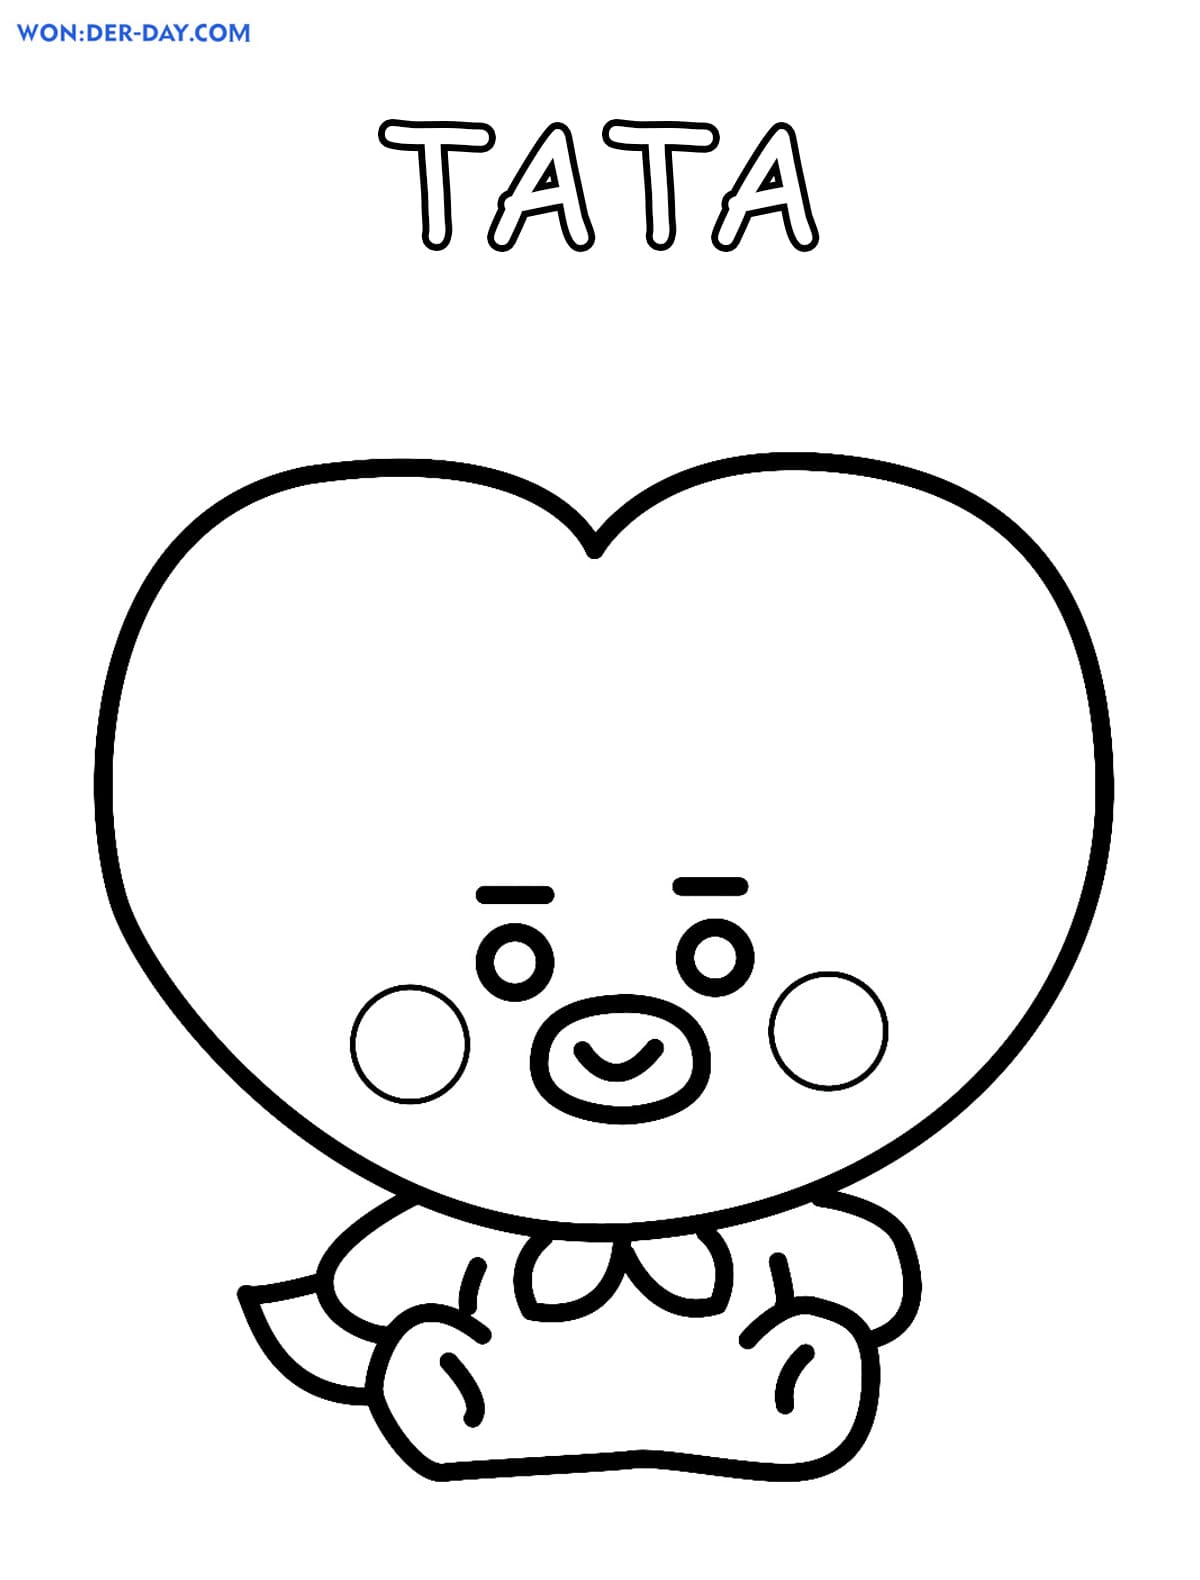 Free Bt21 Coloring Pages - 244+ File for Free